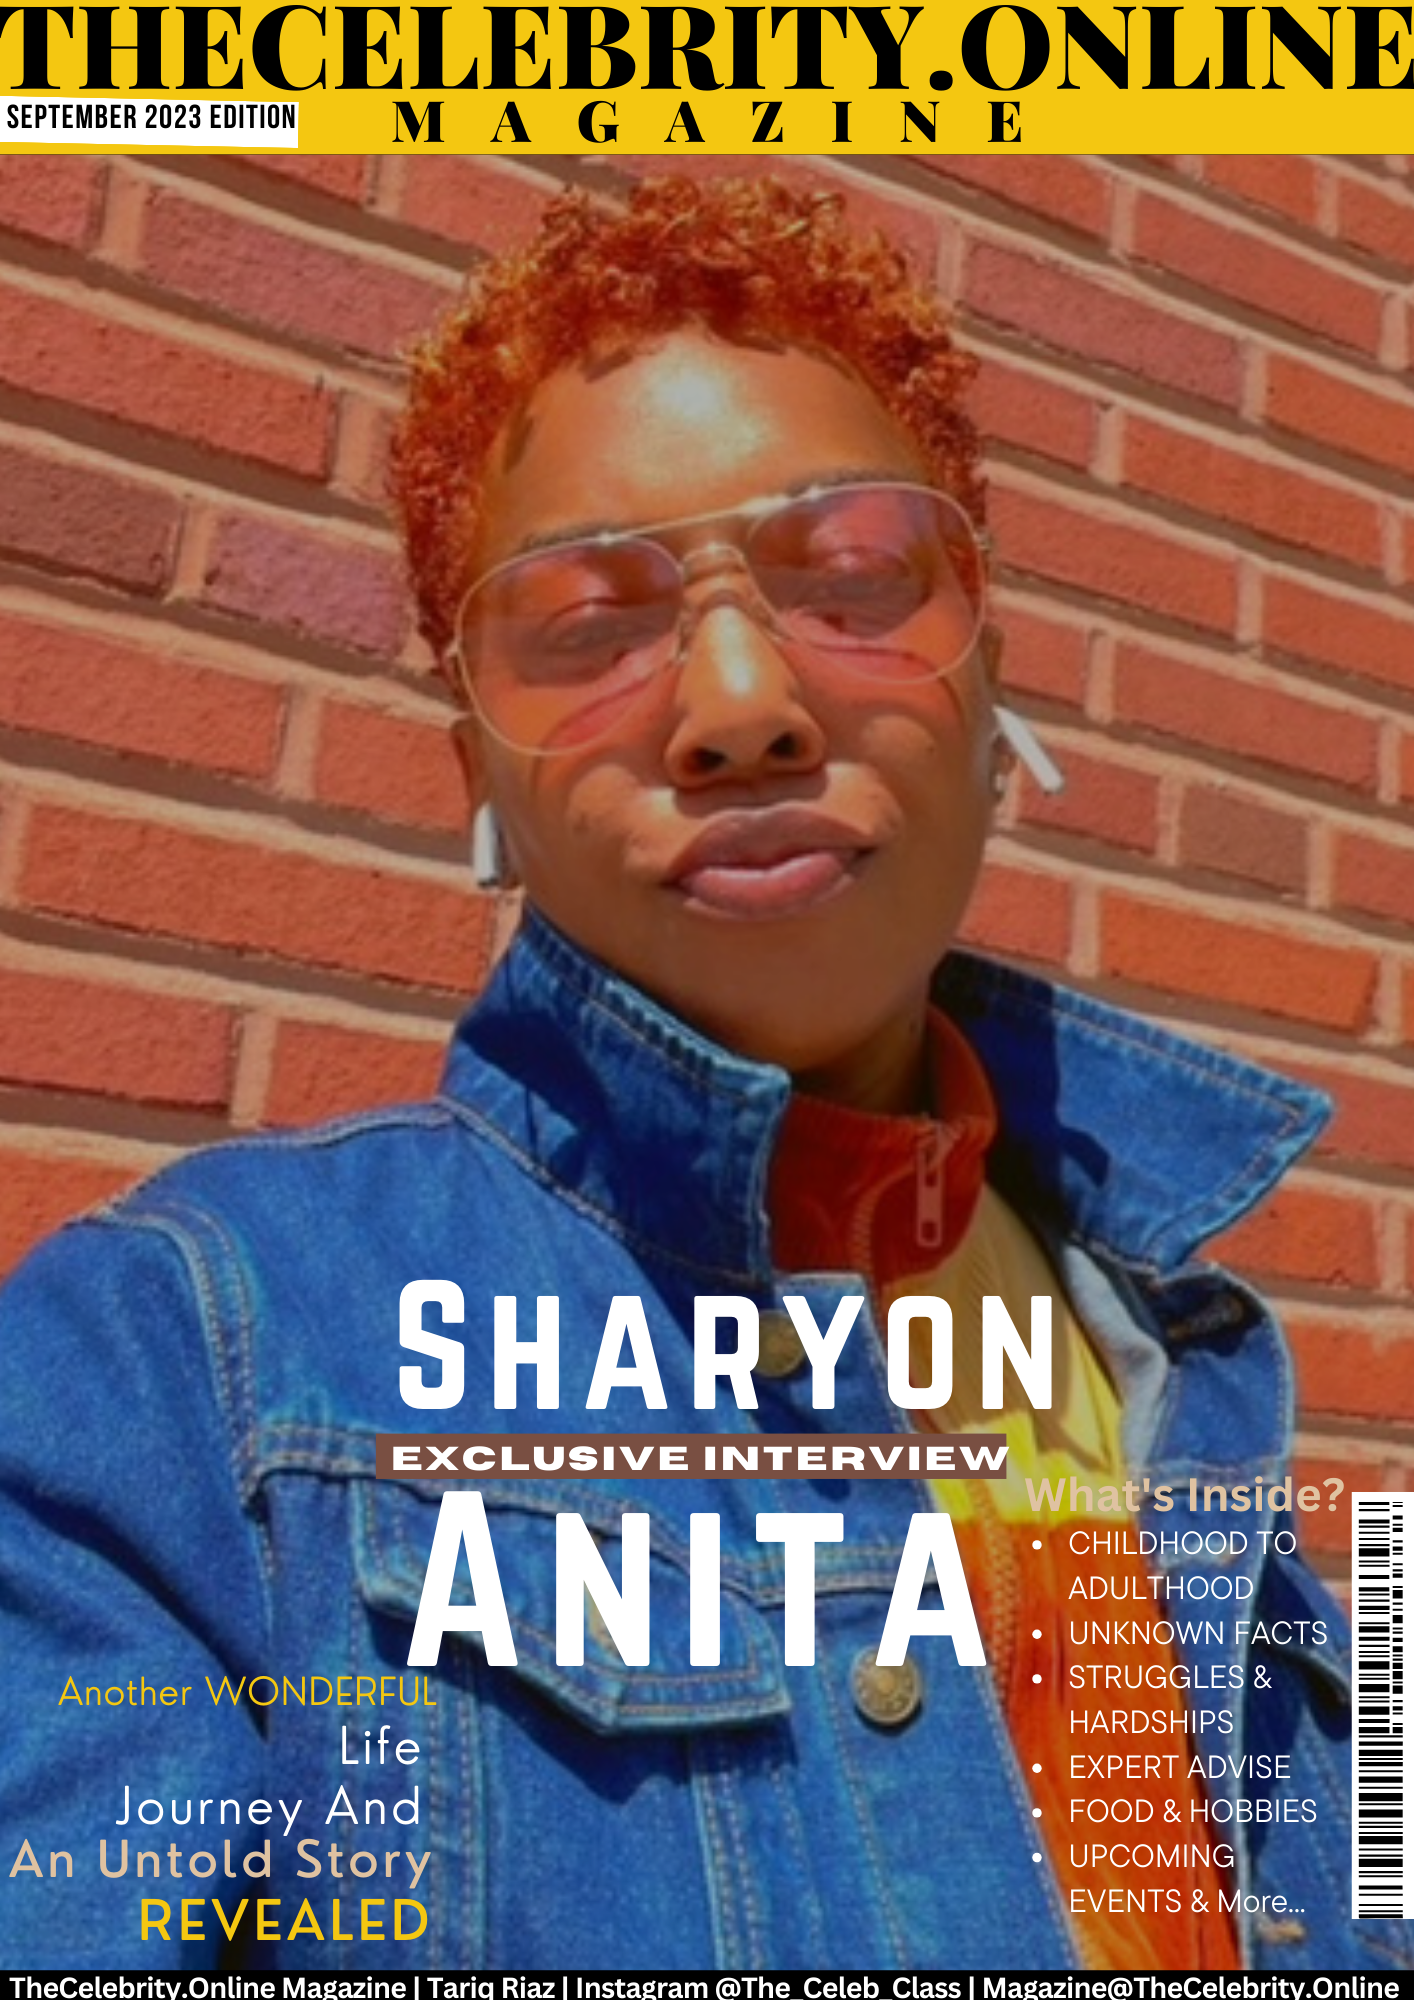 Sharyon Anita Exclusive Interview – ‘To Work On Yourself Emotionally, Mentally, And Spiritually’